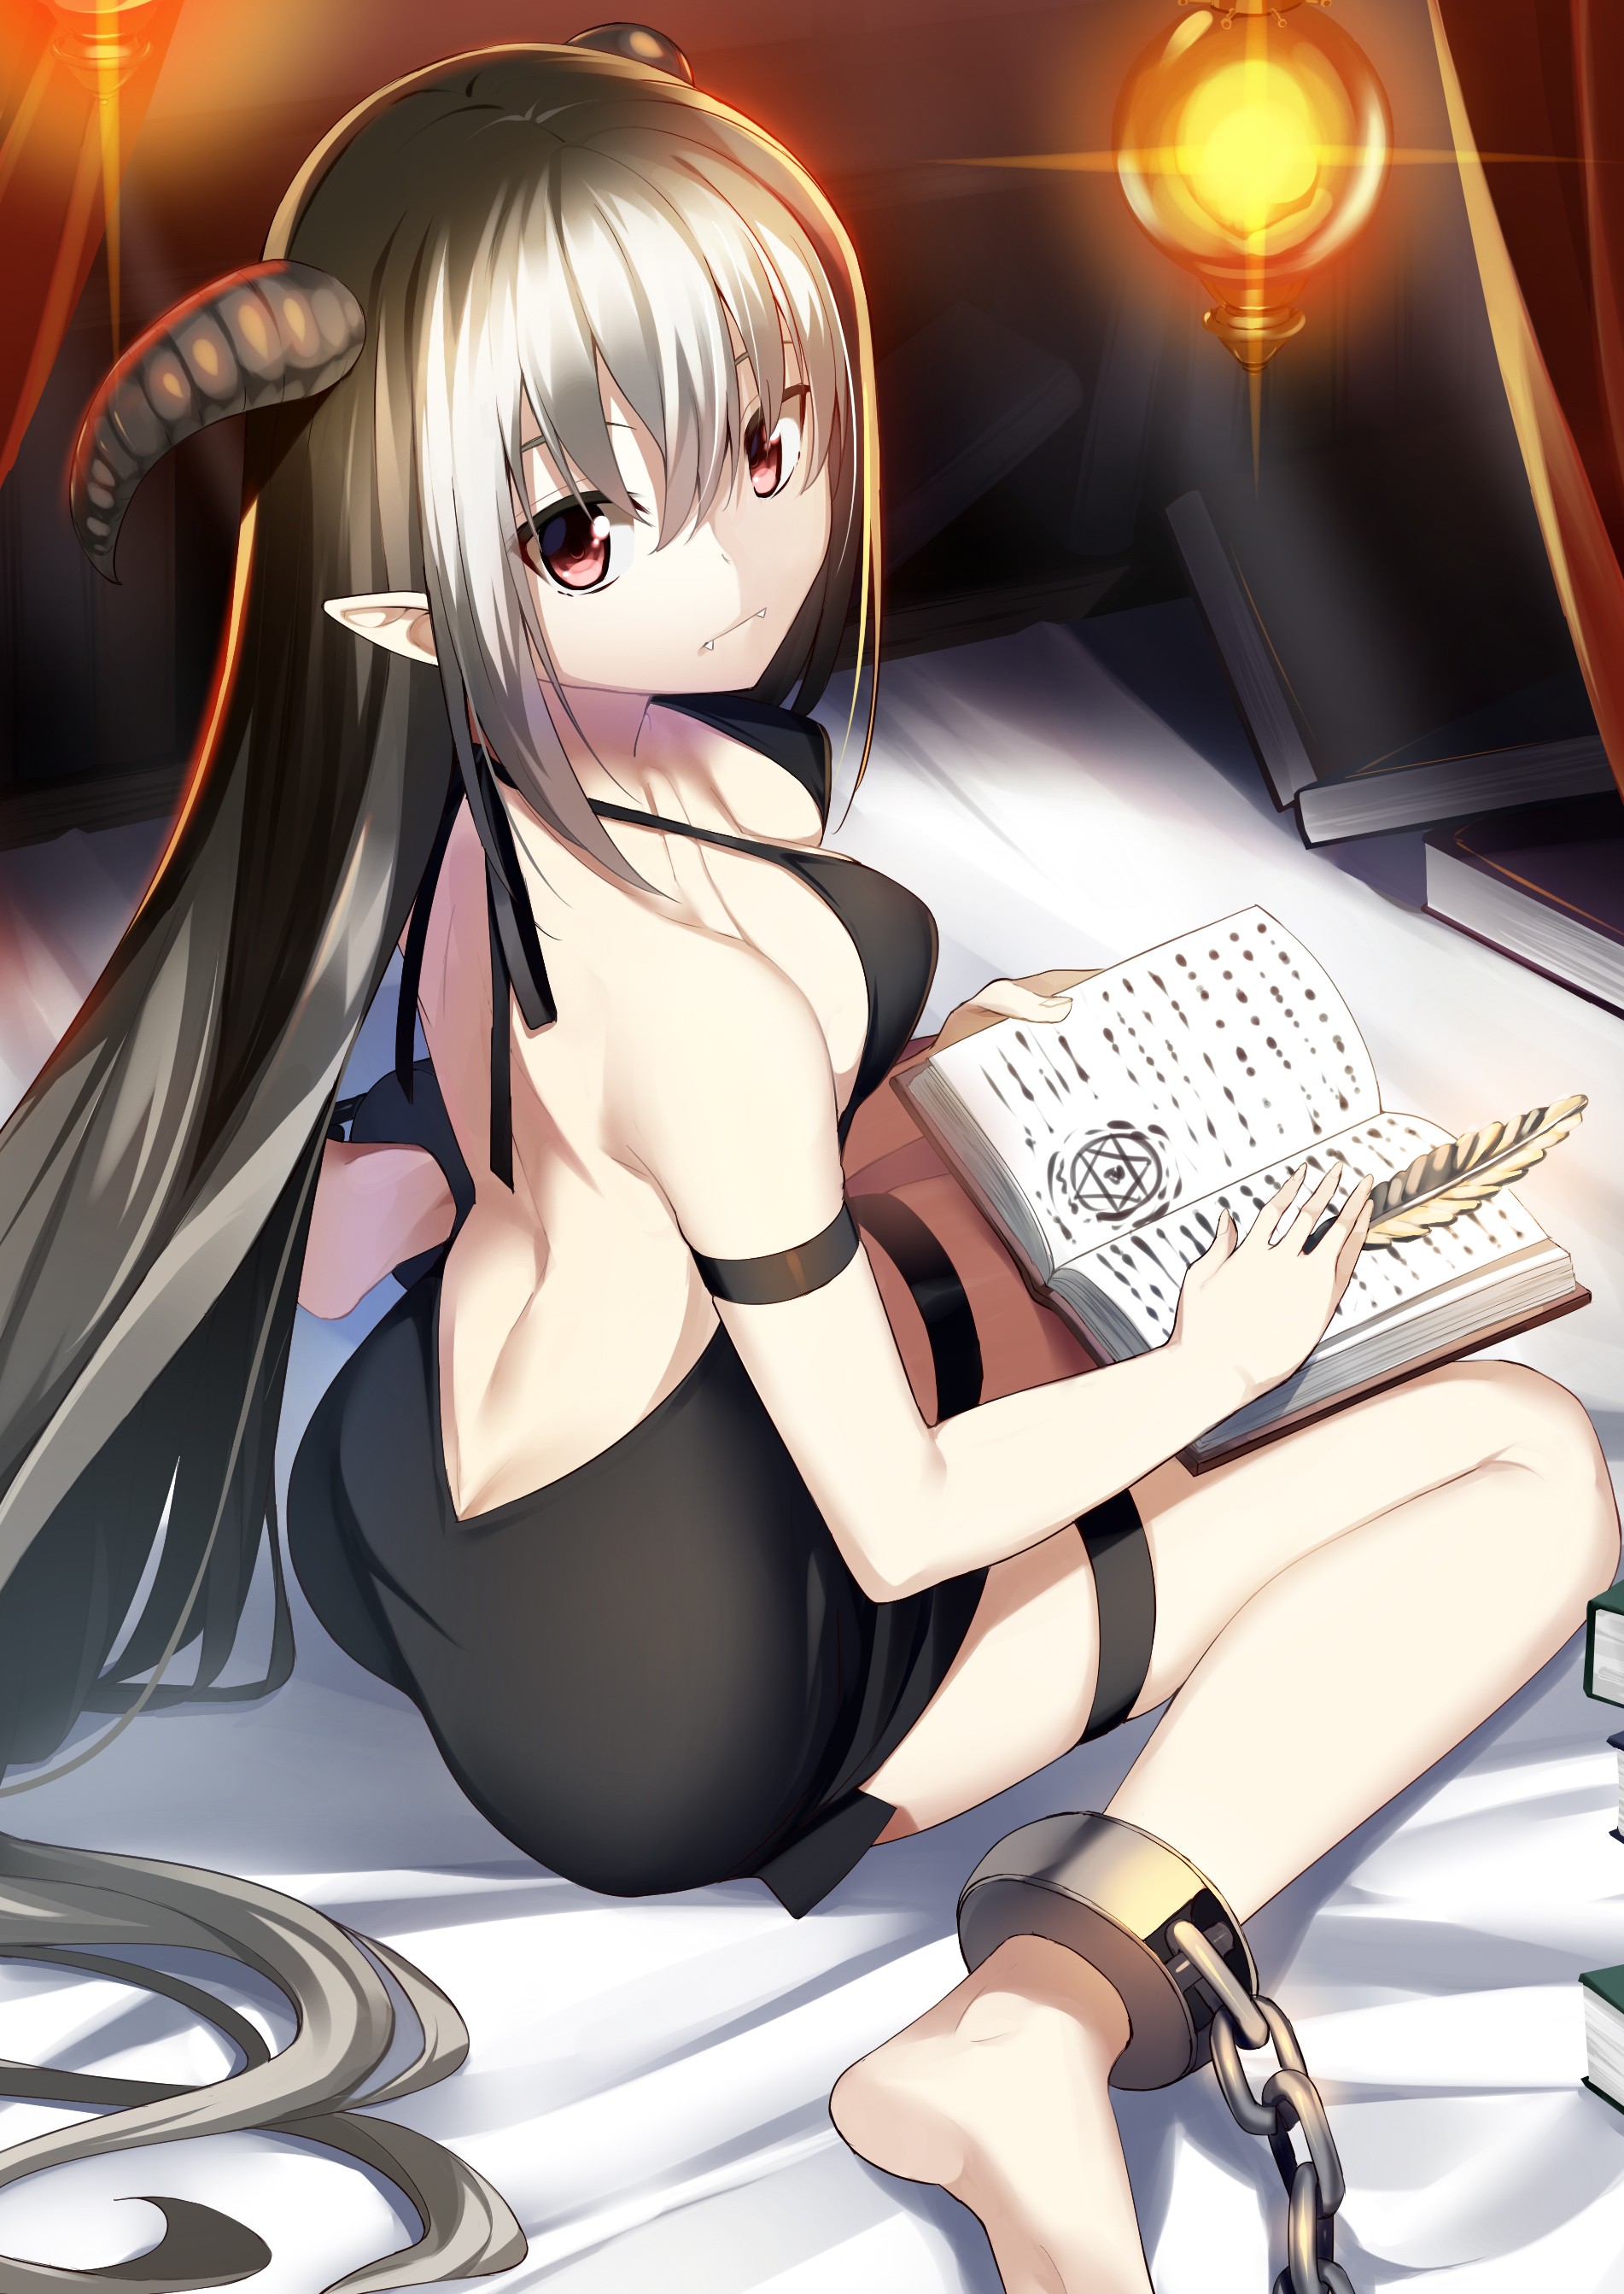 Anime 1902x2686 anime anime girls ass cleavage original characters horns chain on foot chains prisoners books pointy ears Pixiv fantasy girl